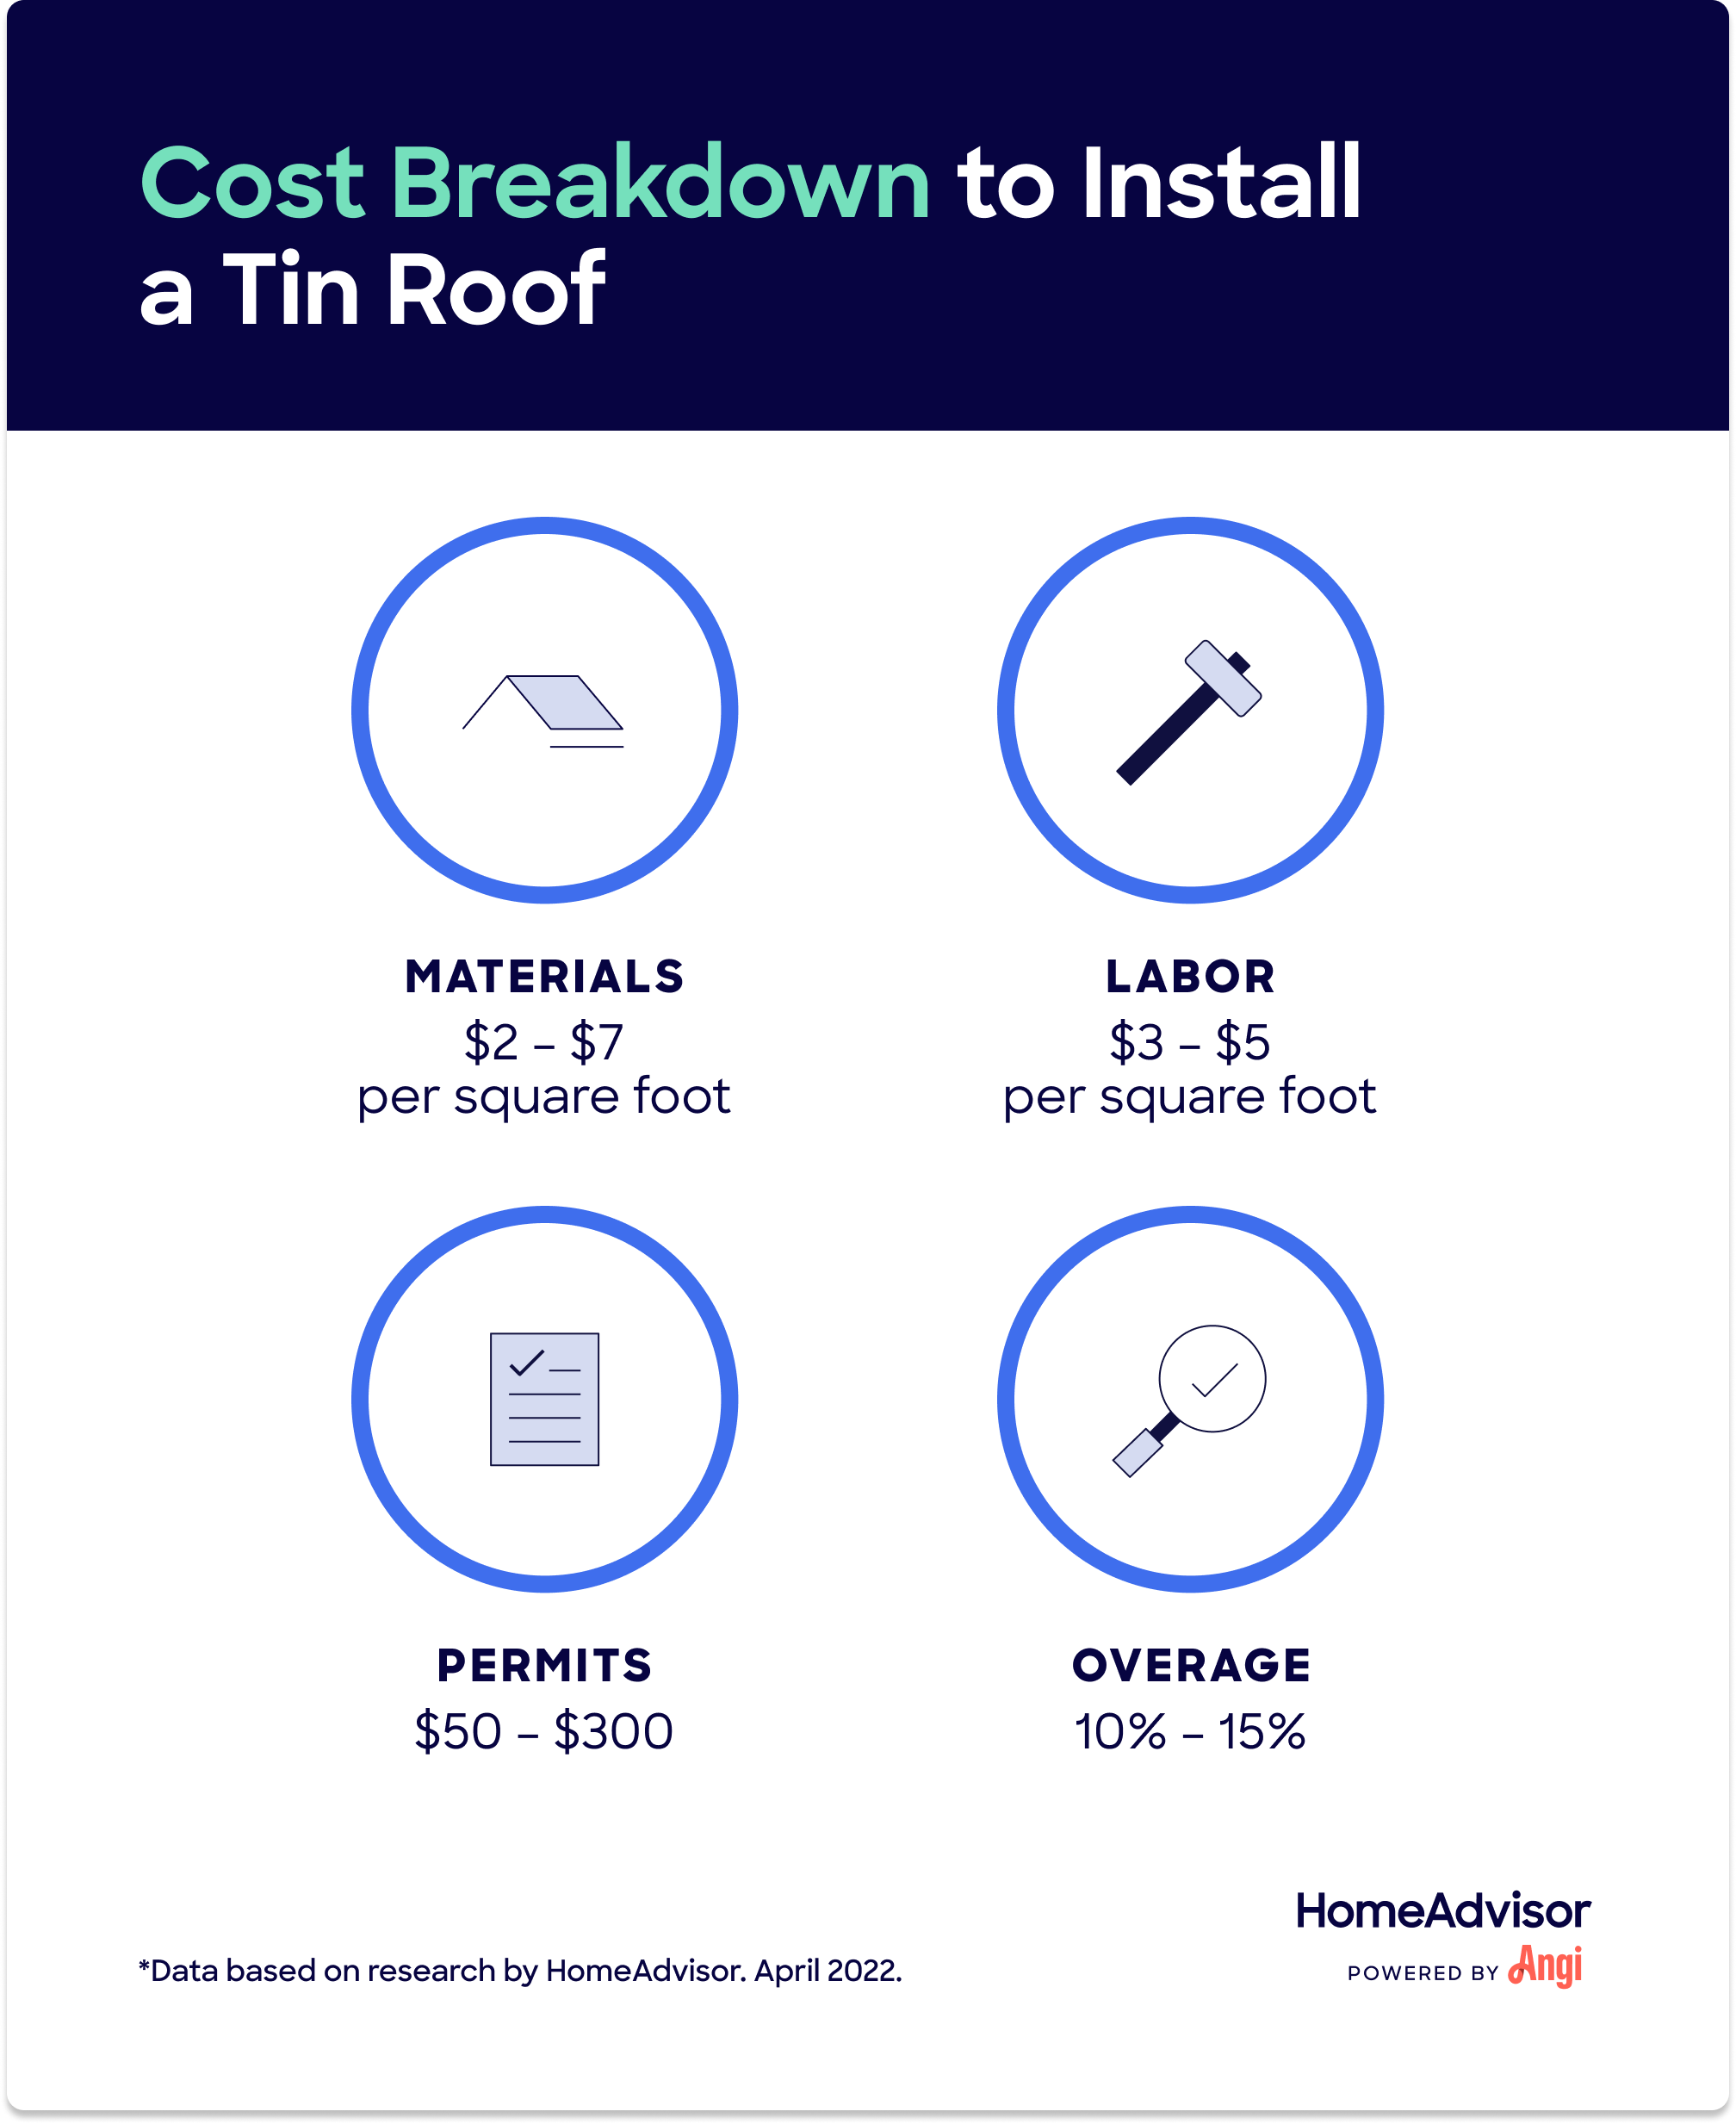 How Much Does a Tin Roof Cost?